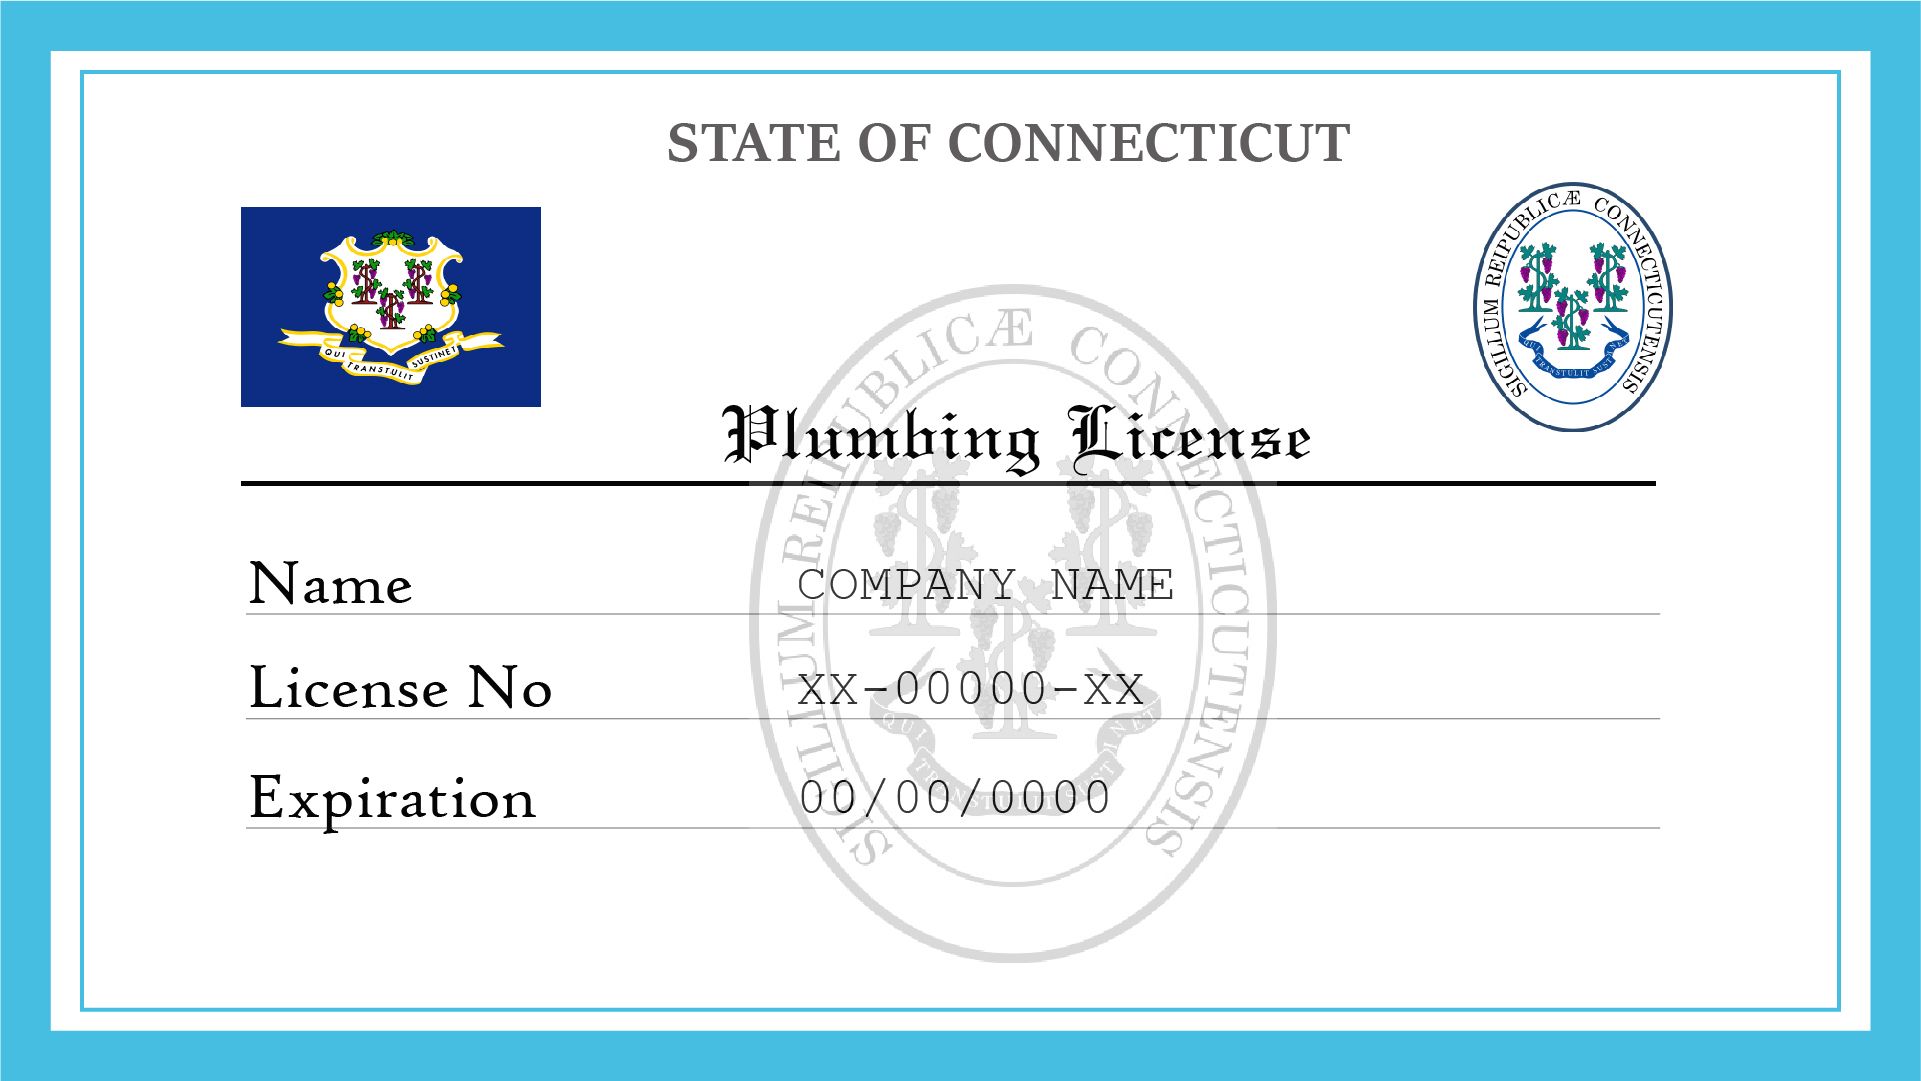 download the last version for windows Connecticut plumber installer license prep class